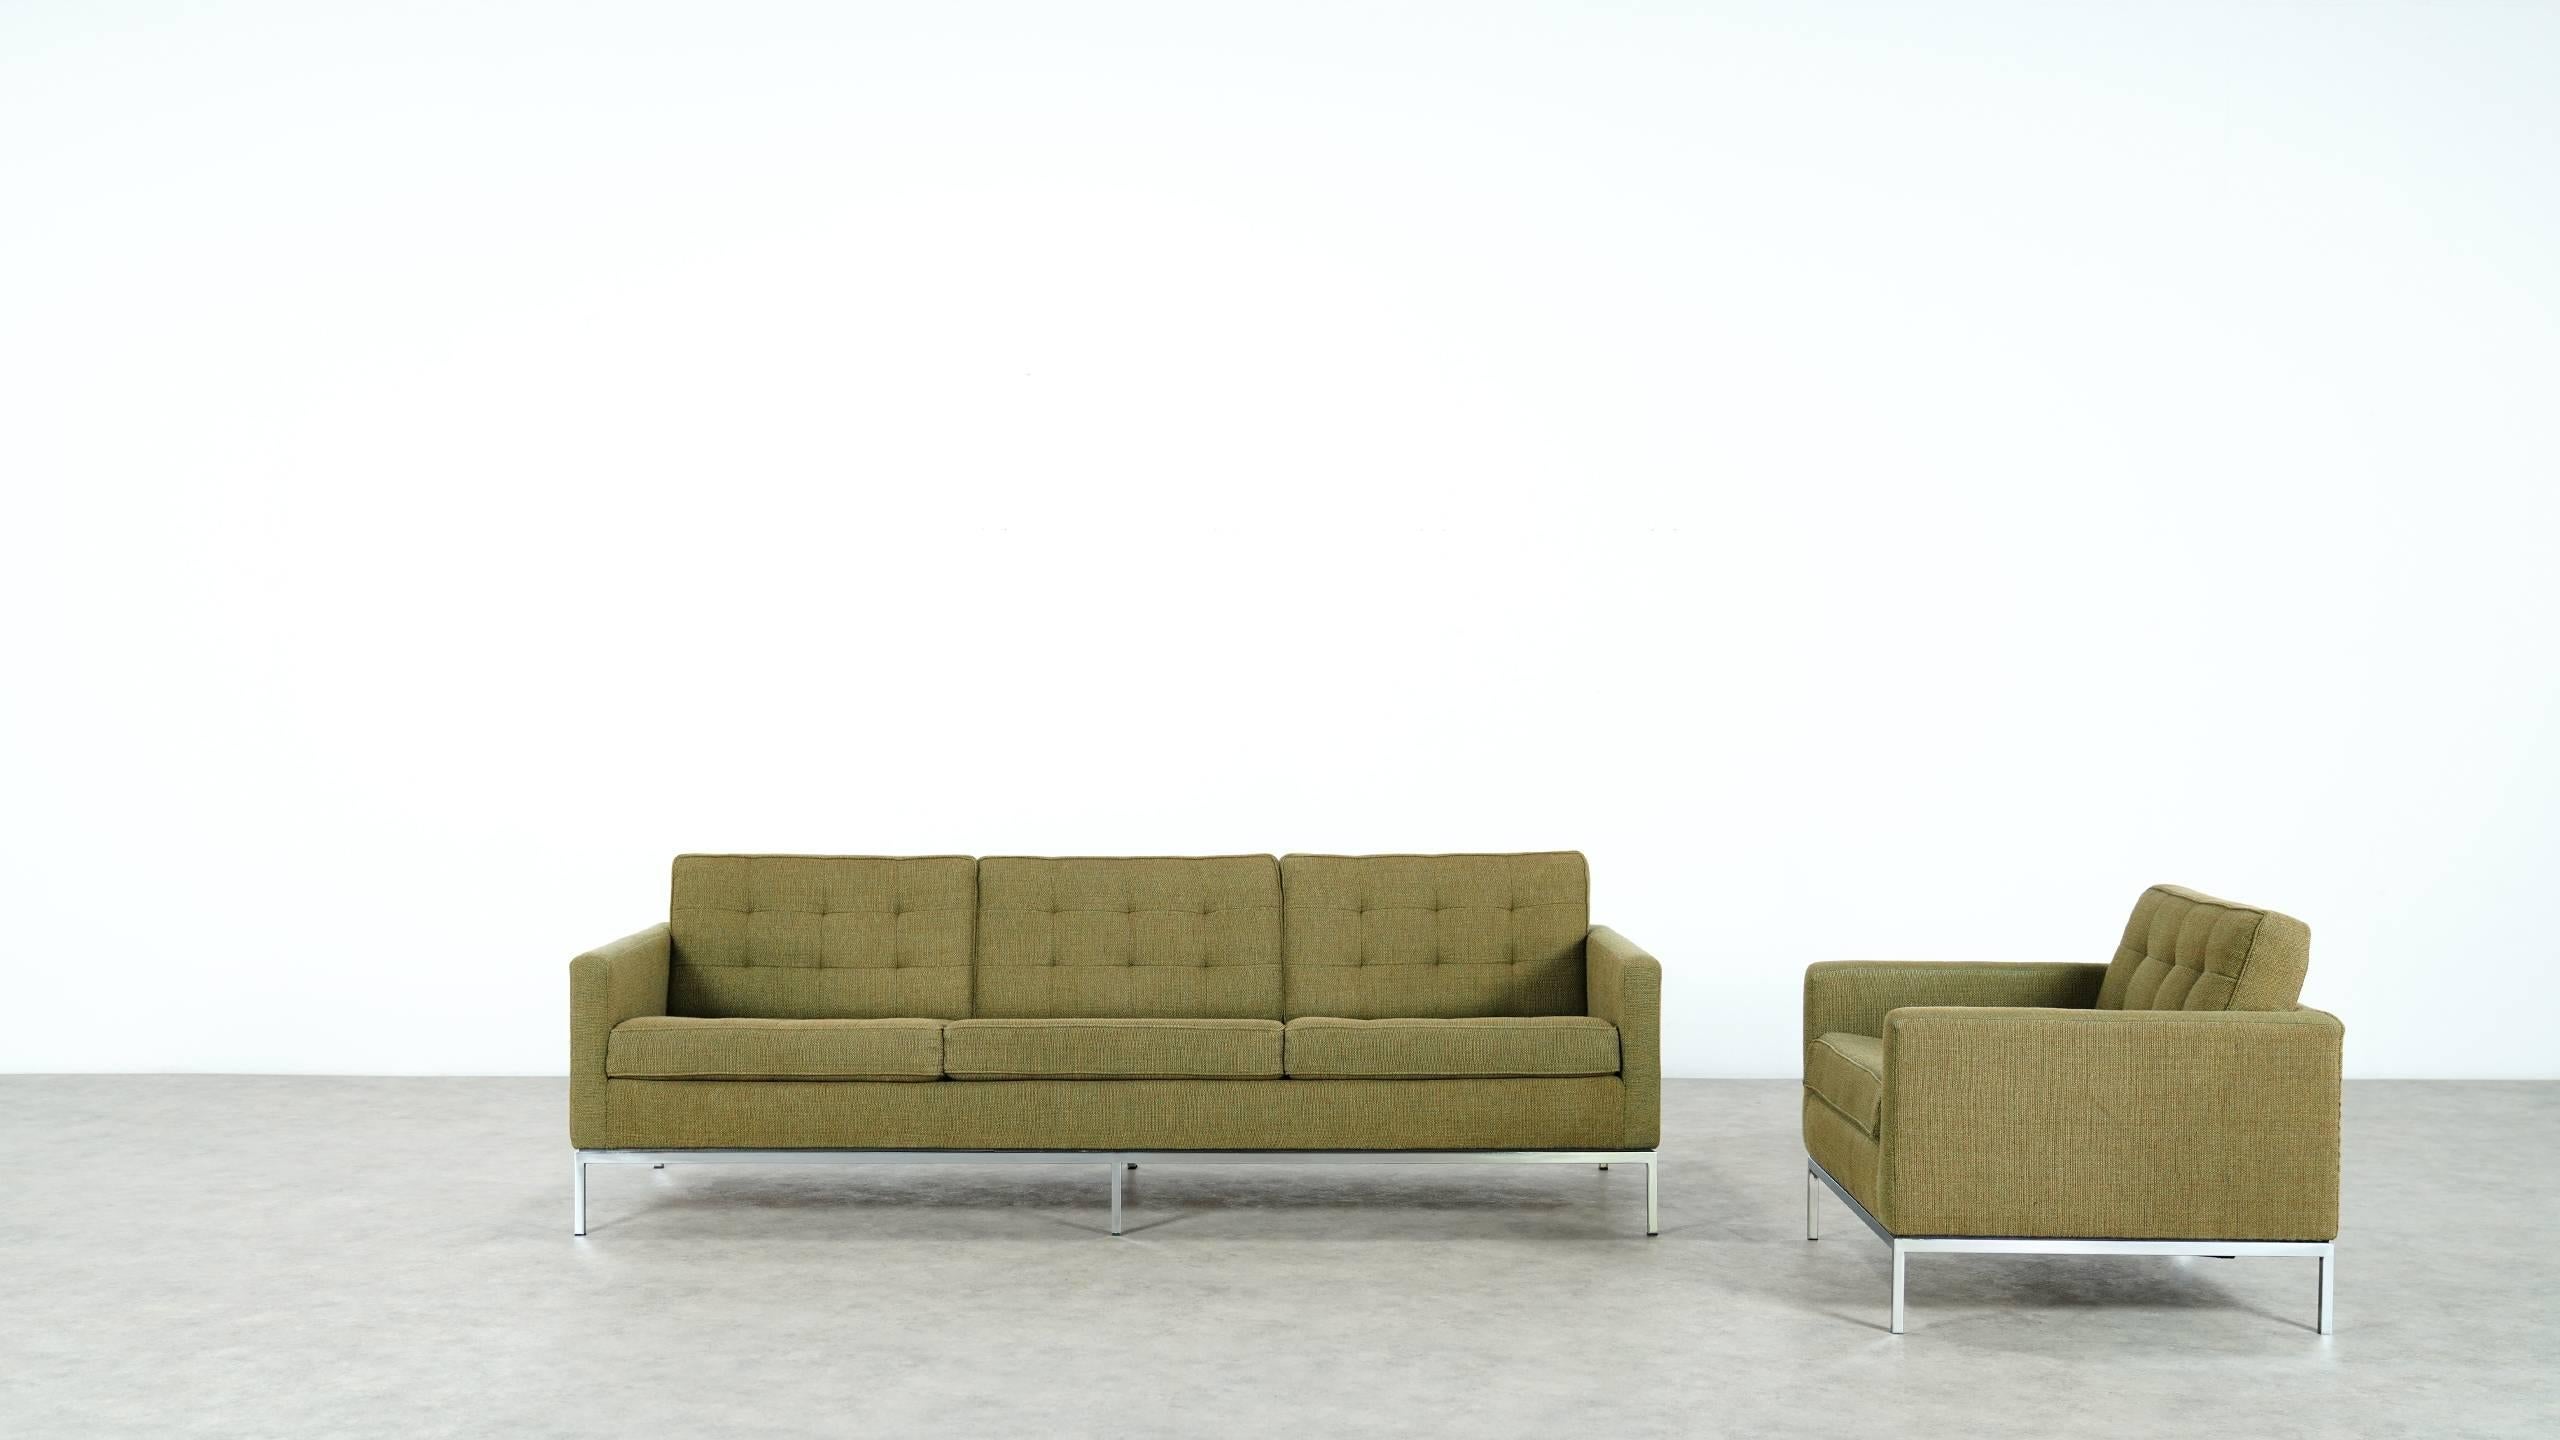 Mid-Century Modern Florence Knoll, Sofa and Lounge Chair, 1954 for Knoll International, in Kvadrat